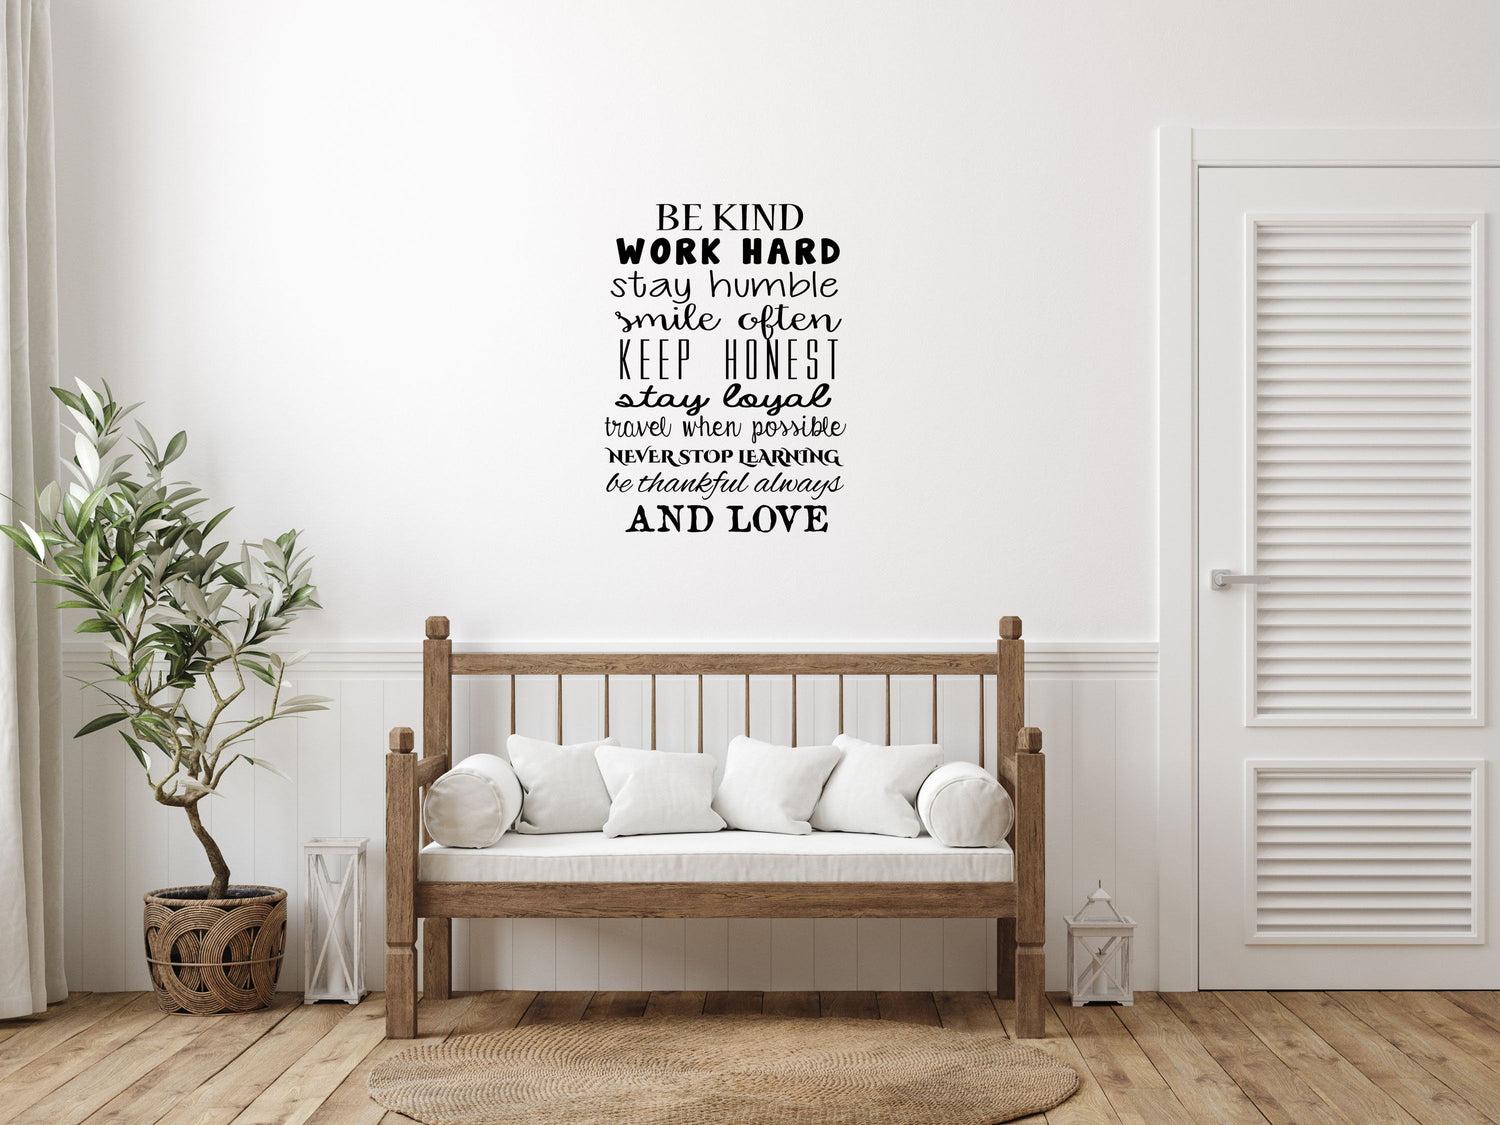 Always Forever Romantic Bedroom Wall Sticker Love Quote Wall Art